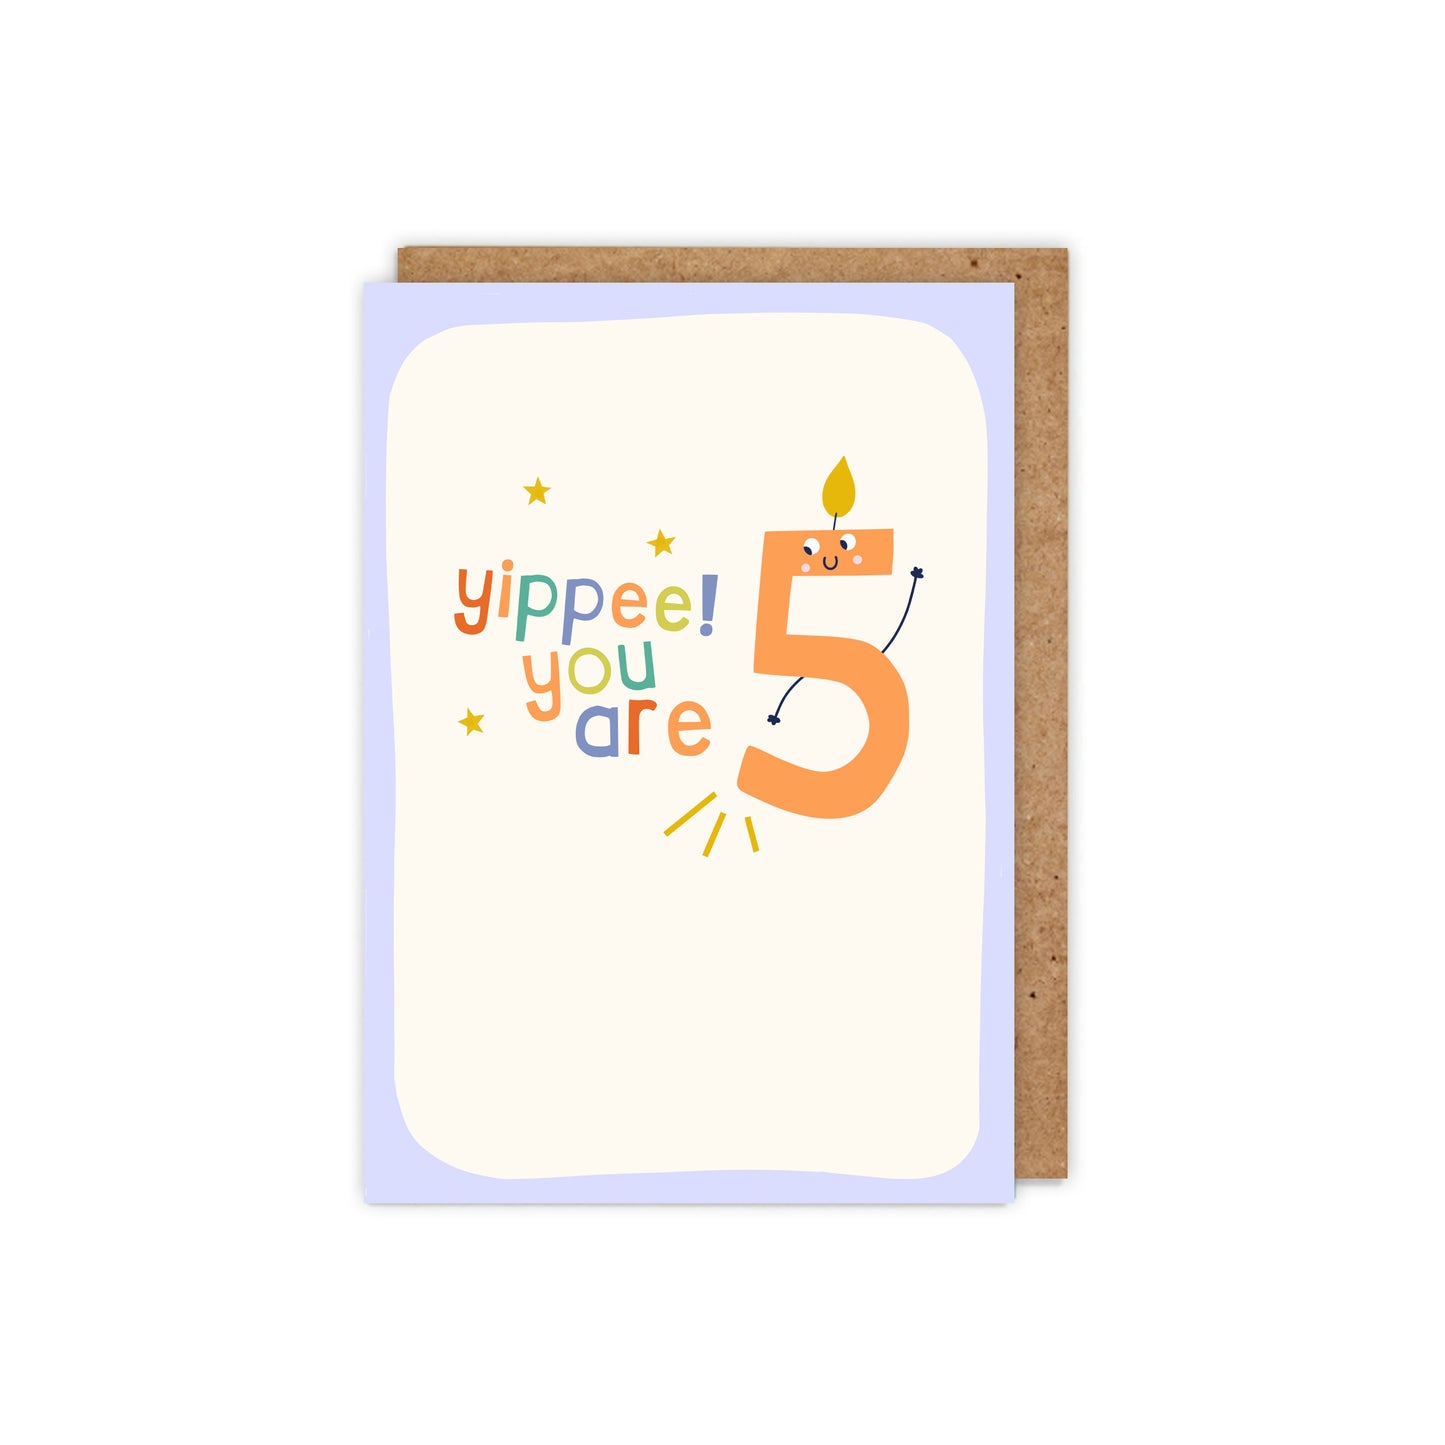 Yippee! You are 5! 5th Birthday Card